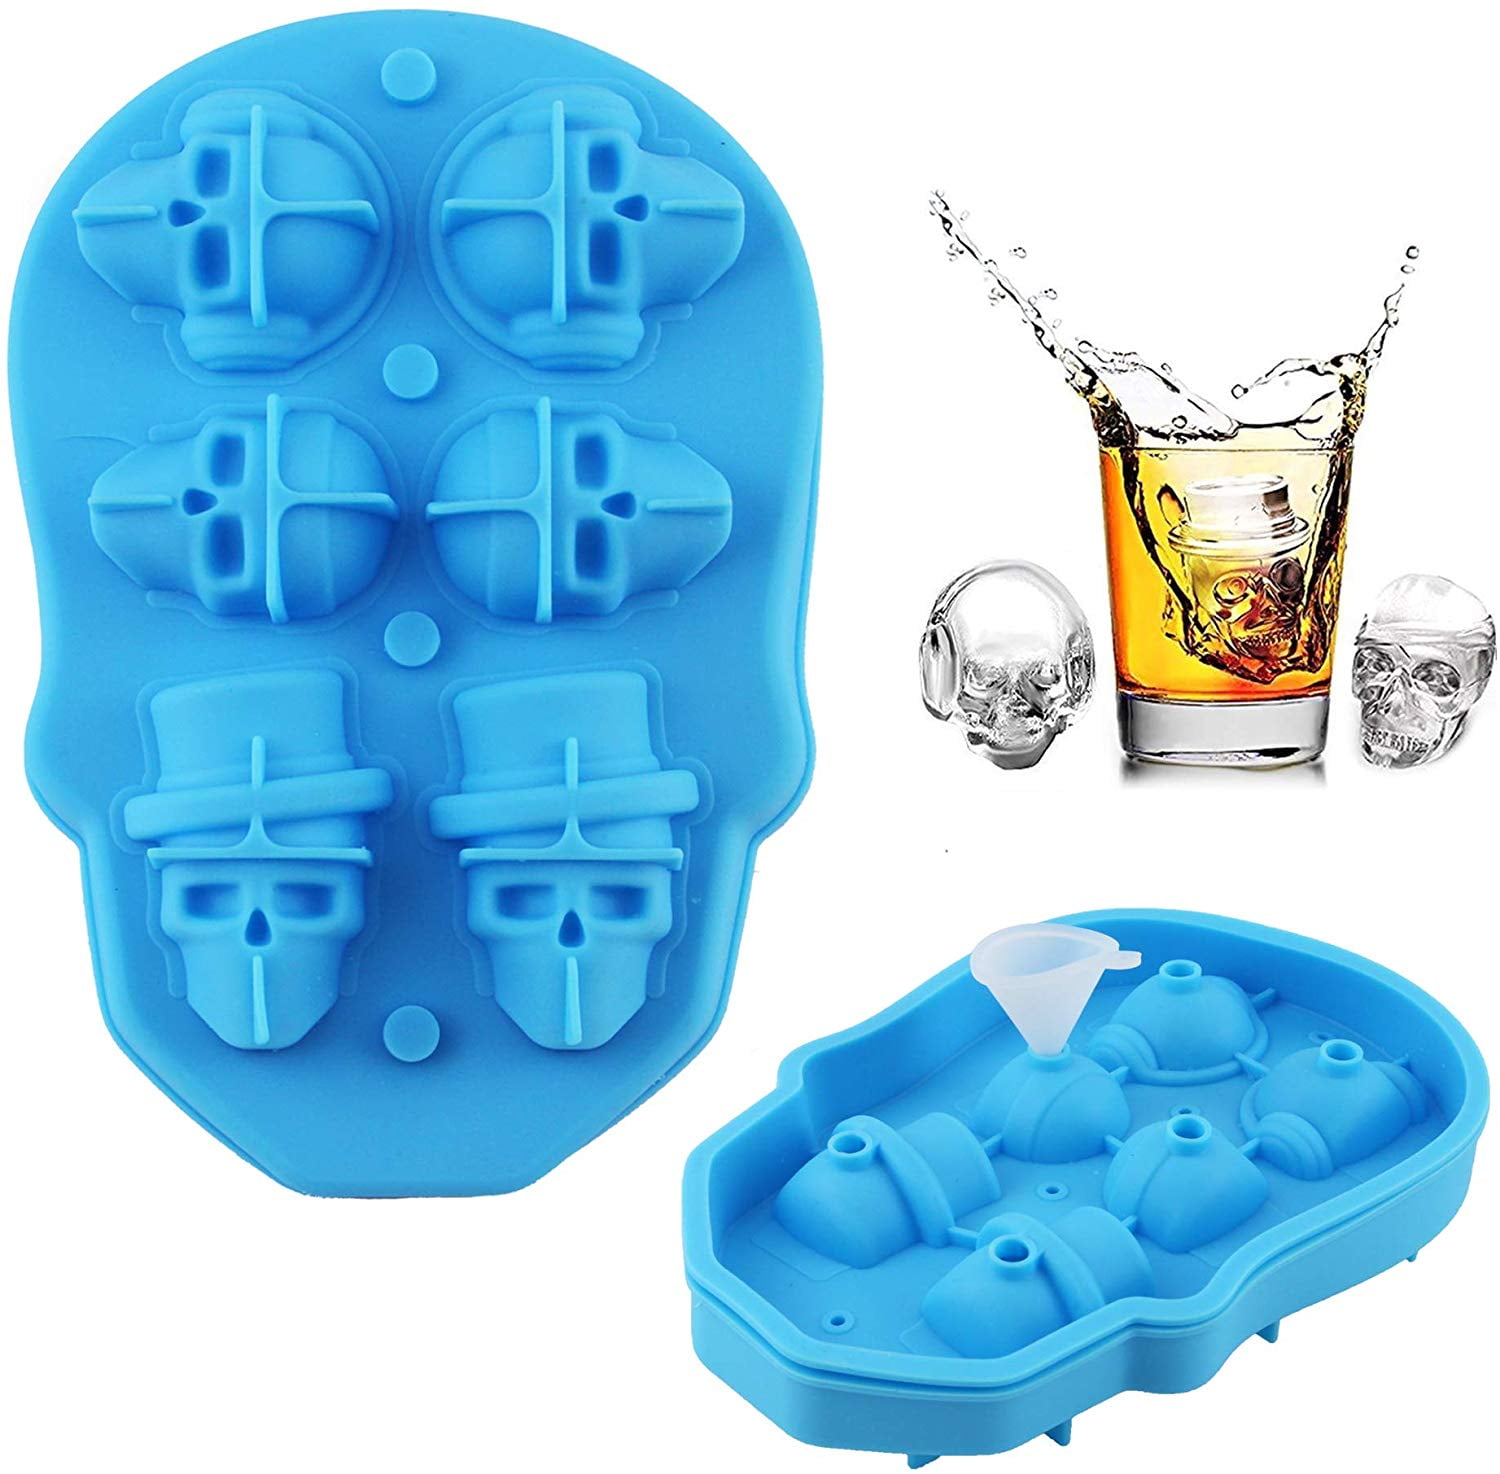 1pcs Big Silicon Ice Cube Maker Mold Mould 3D Skull Halloween Tray Party Br E6Y4 